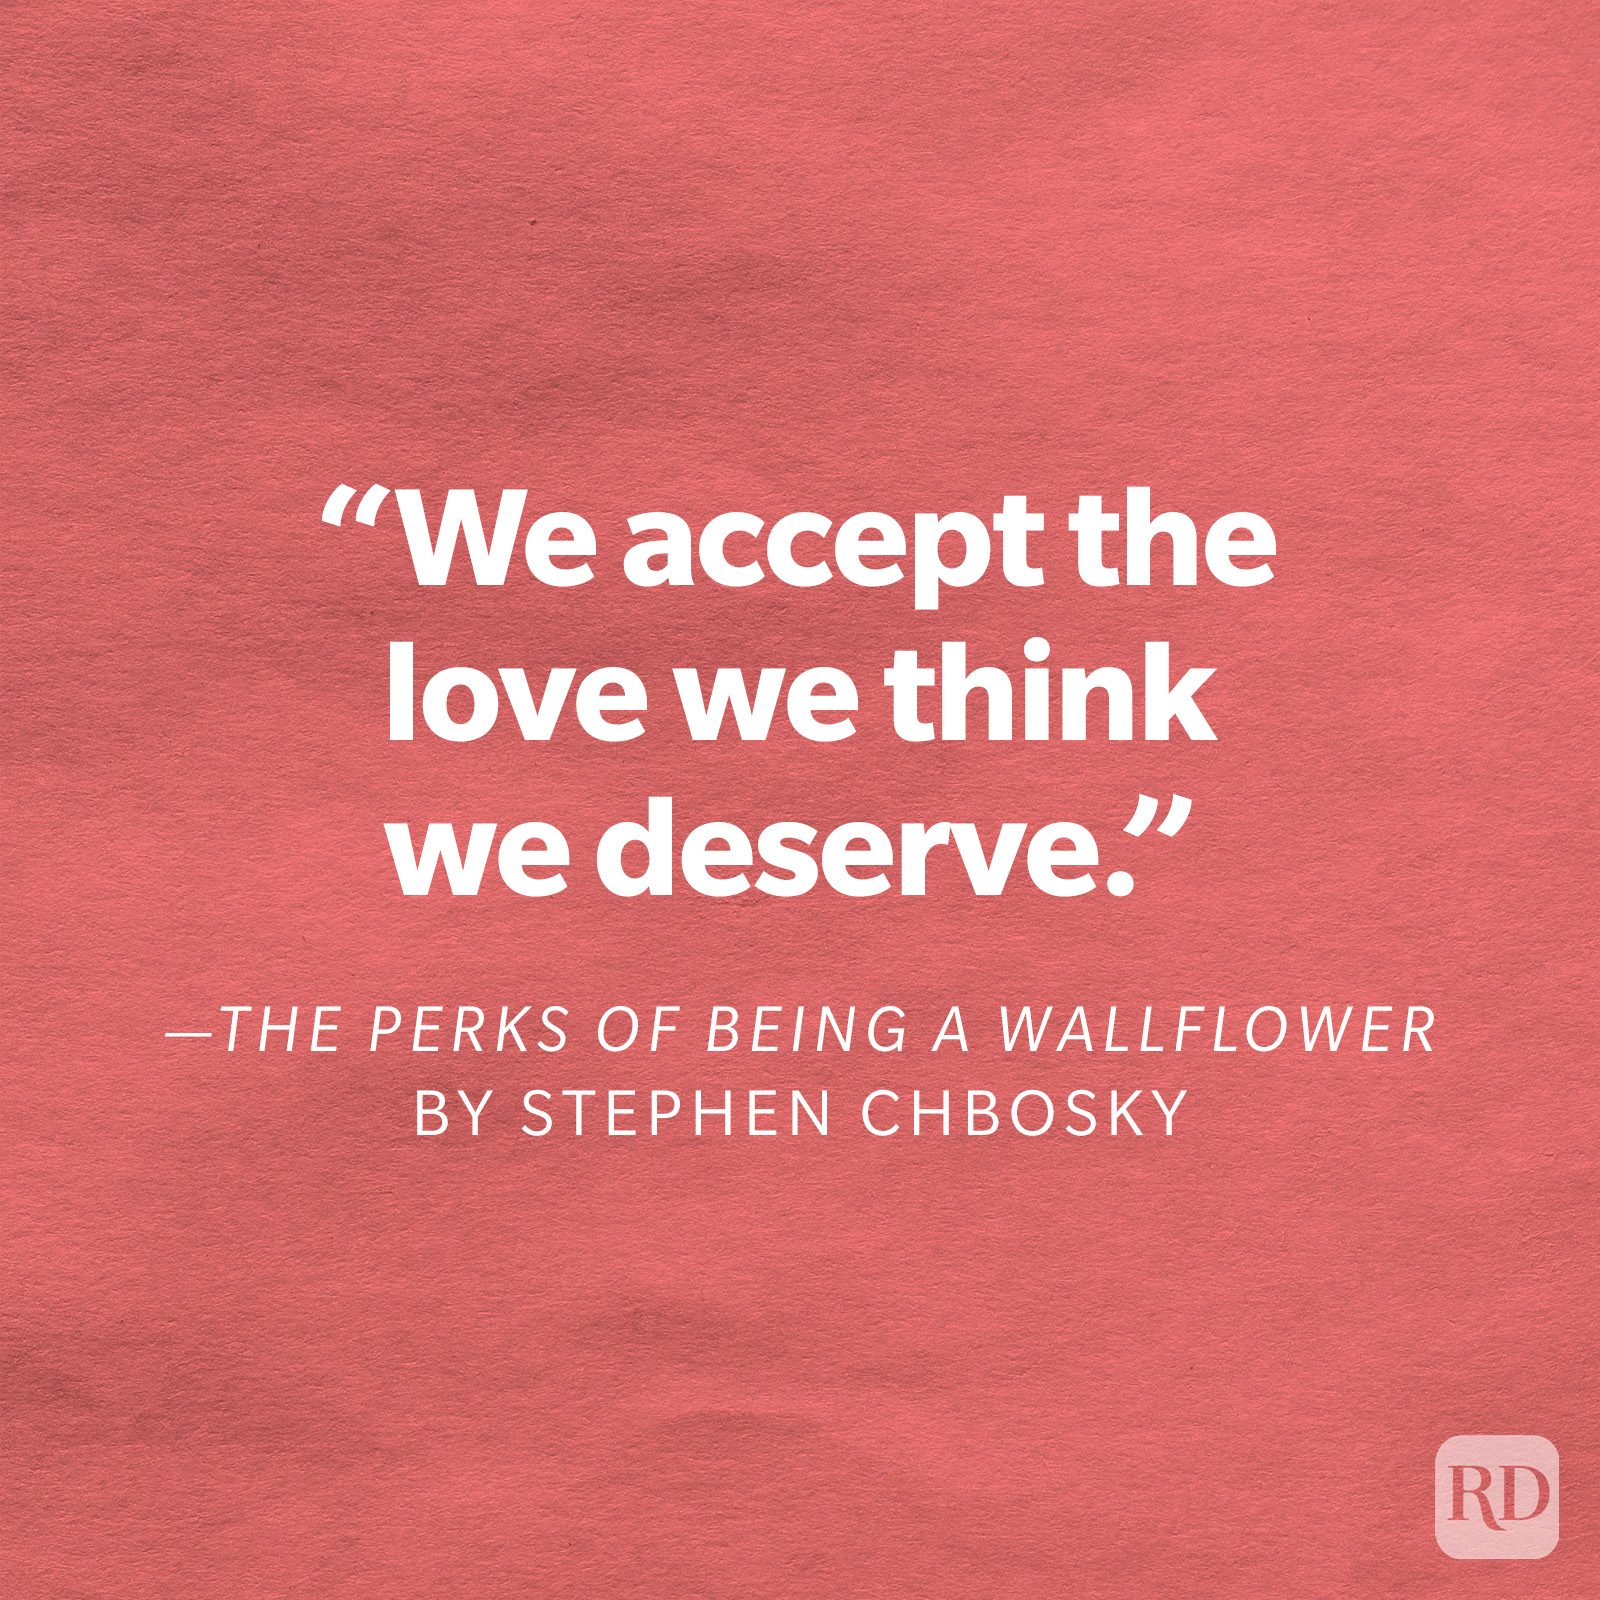 The Perks of Being a Wallflower by Stephen Chbosky "We accept the love we think we deserve."